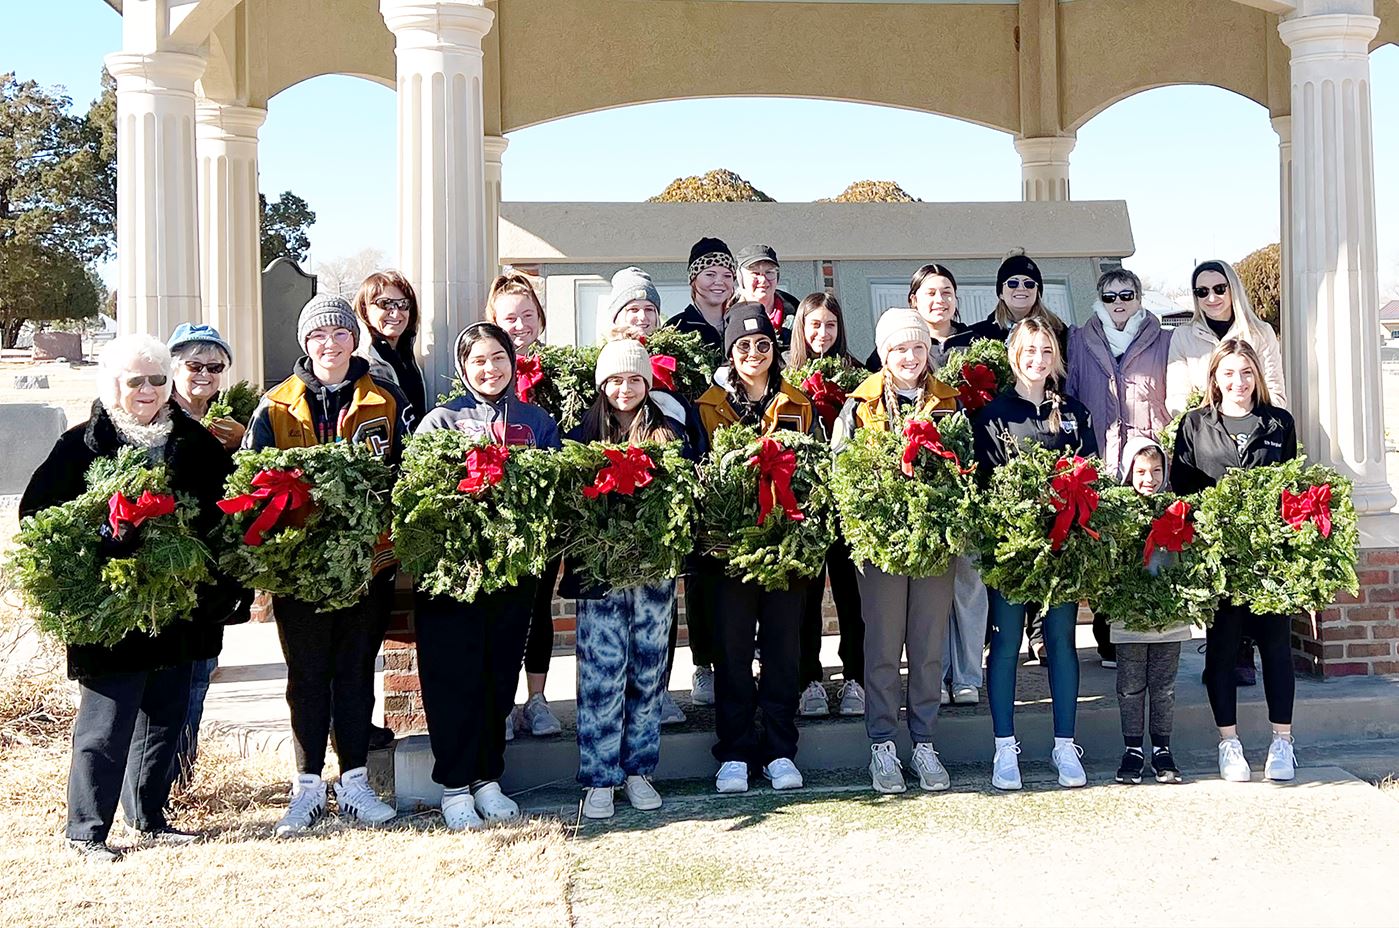 Wreaths Day 2022 With Lady Cats' Softball Team